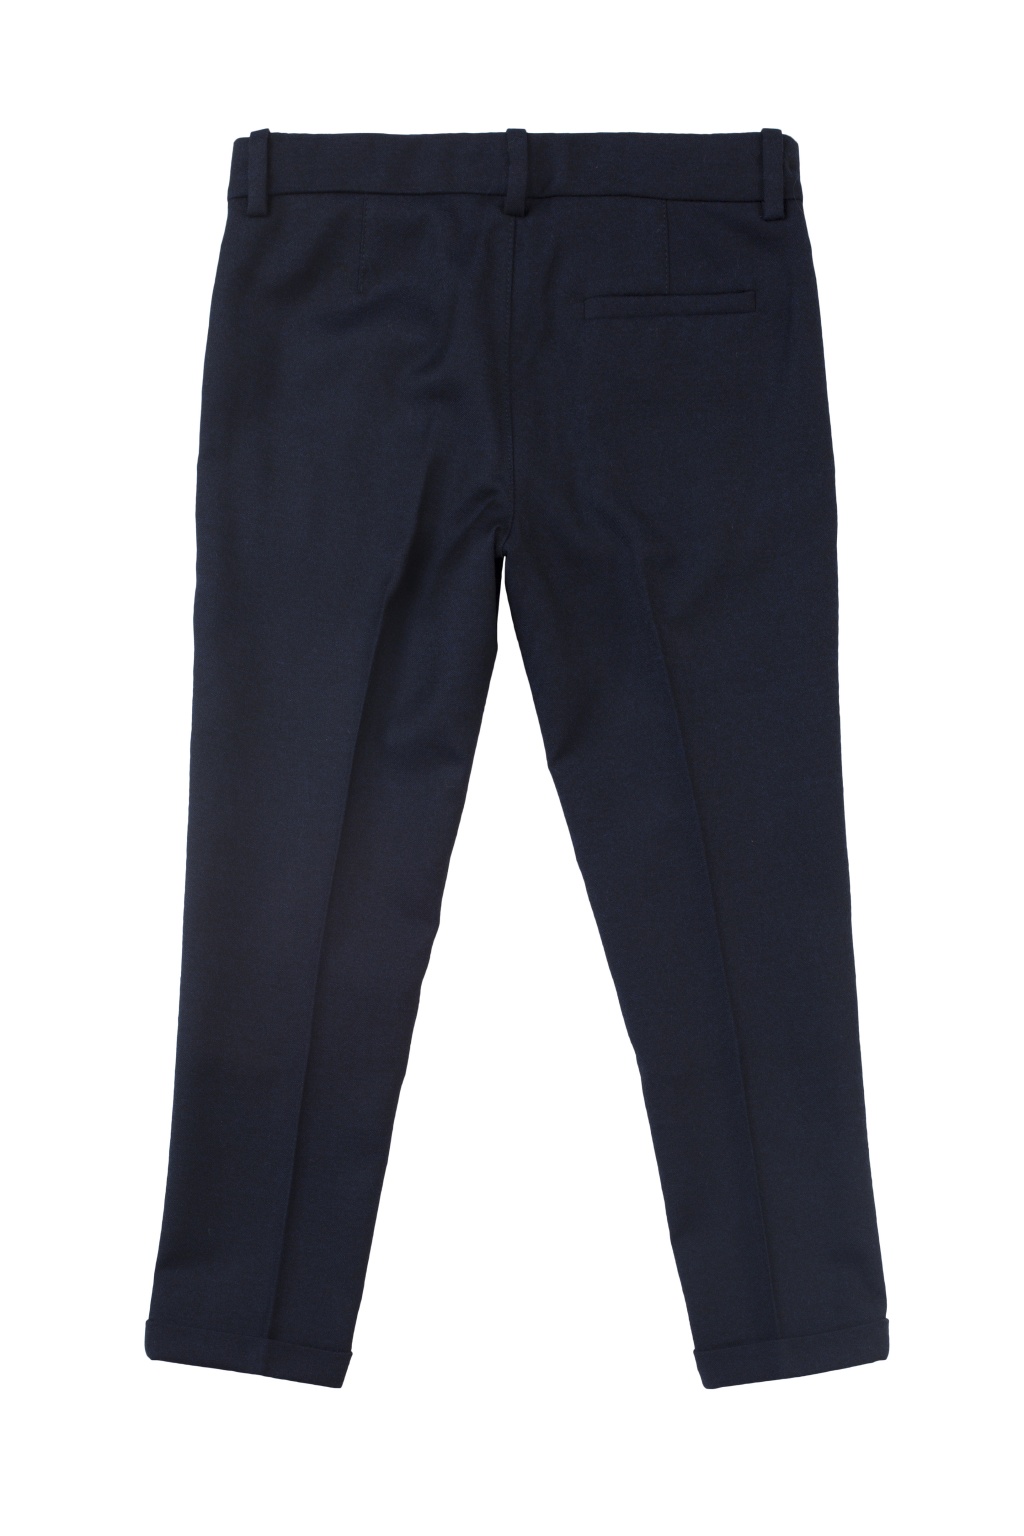 Gucci Kids Formal pleat-front trousers